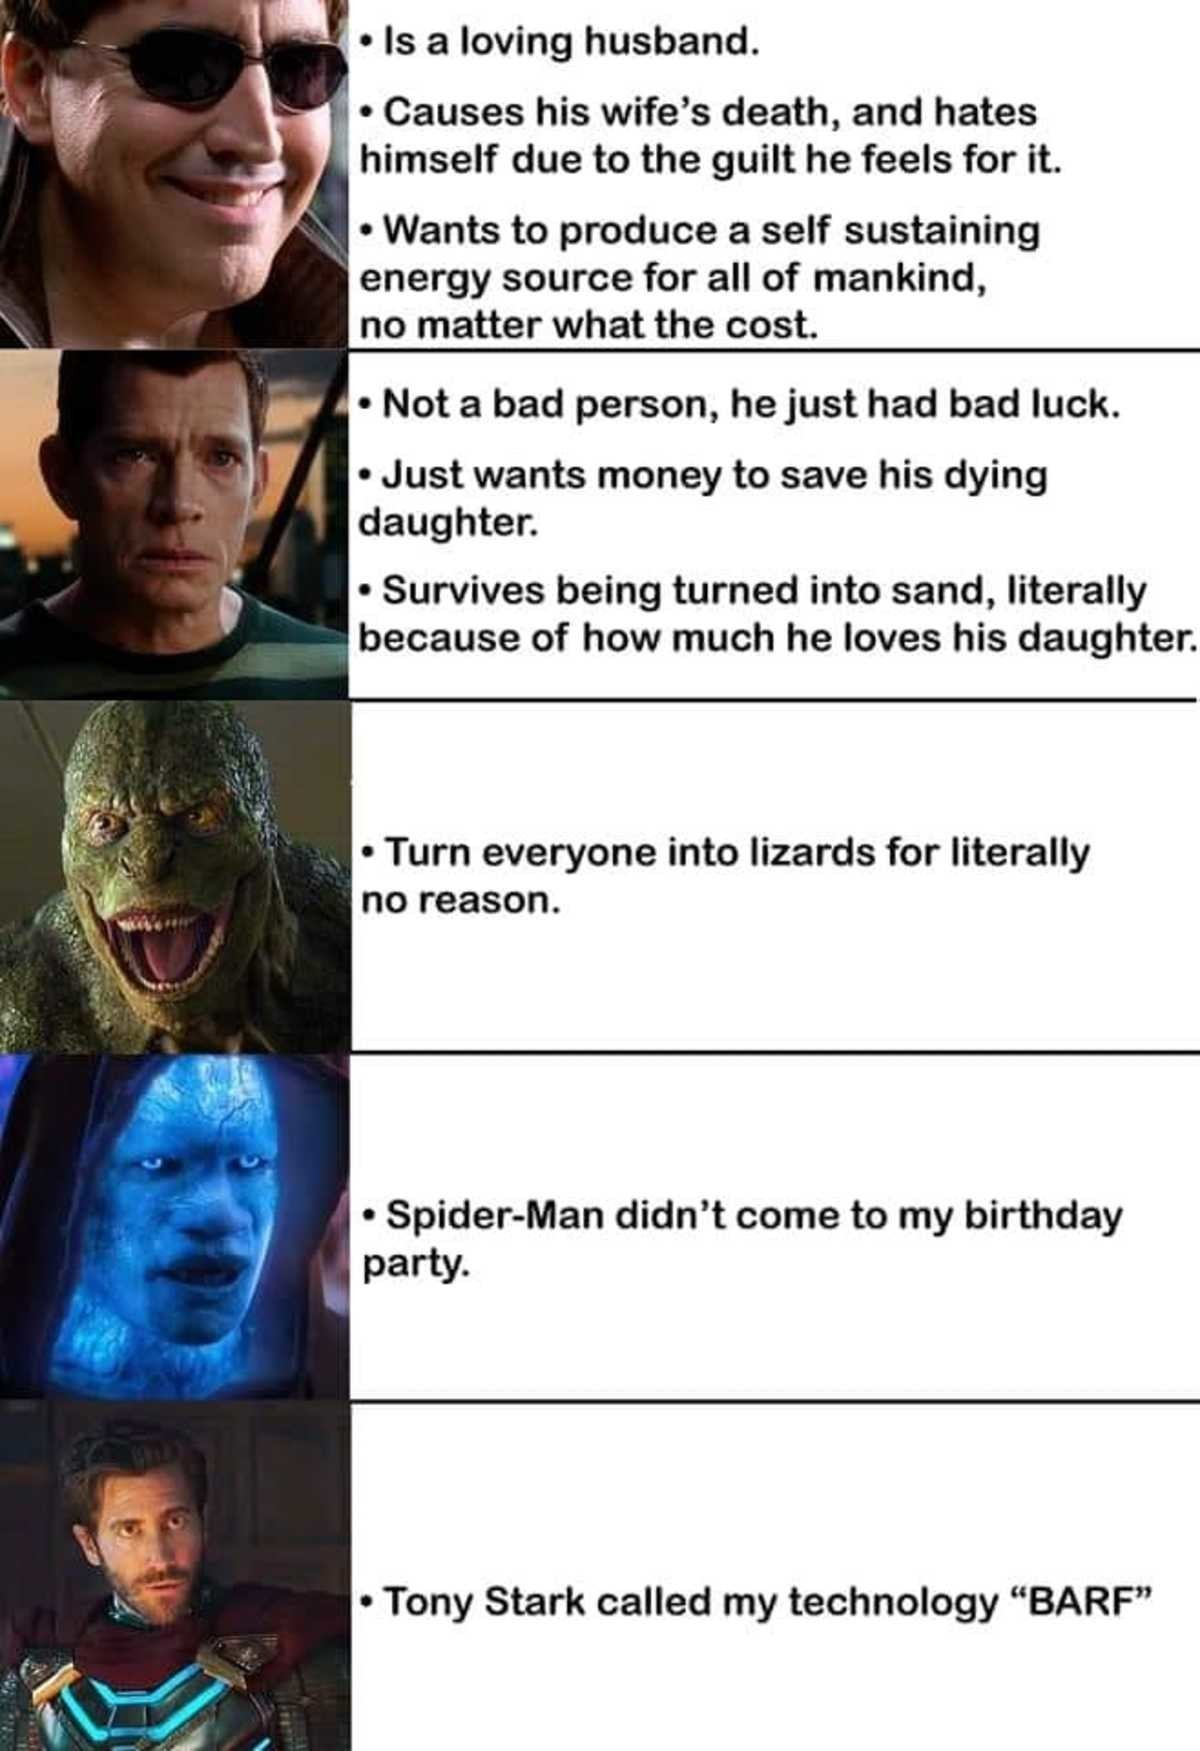 spider man villain meme - Is a loving husband. . Causes his wife's death, and hates himself due to the guilt he feels for it. Wants to produce a self sustaining energy source for all of mankind, no matter what the cost. Not a bad person, he just had bad l